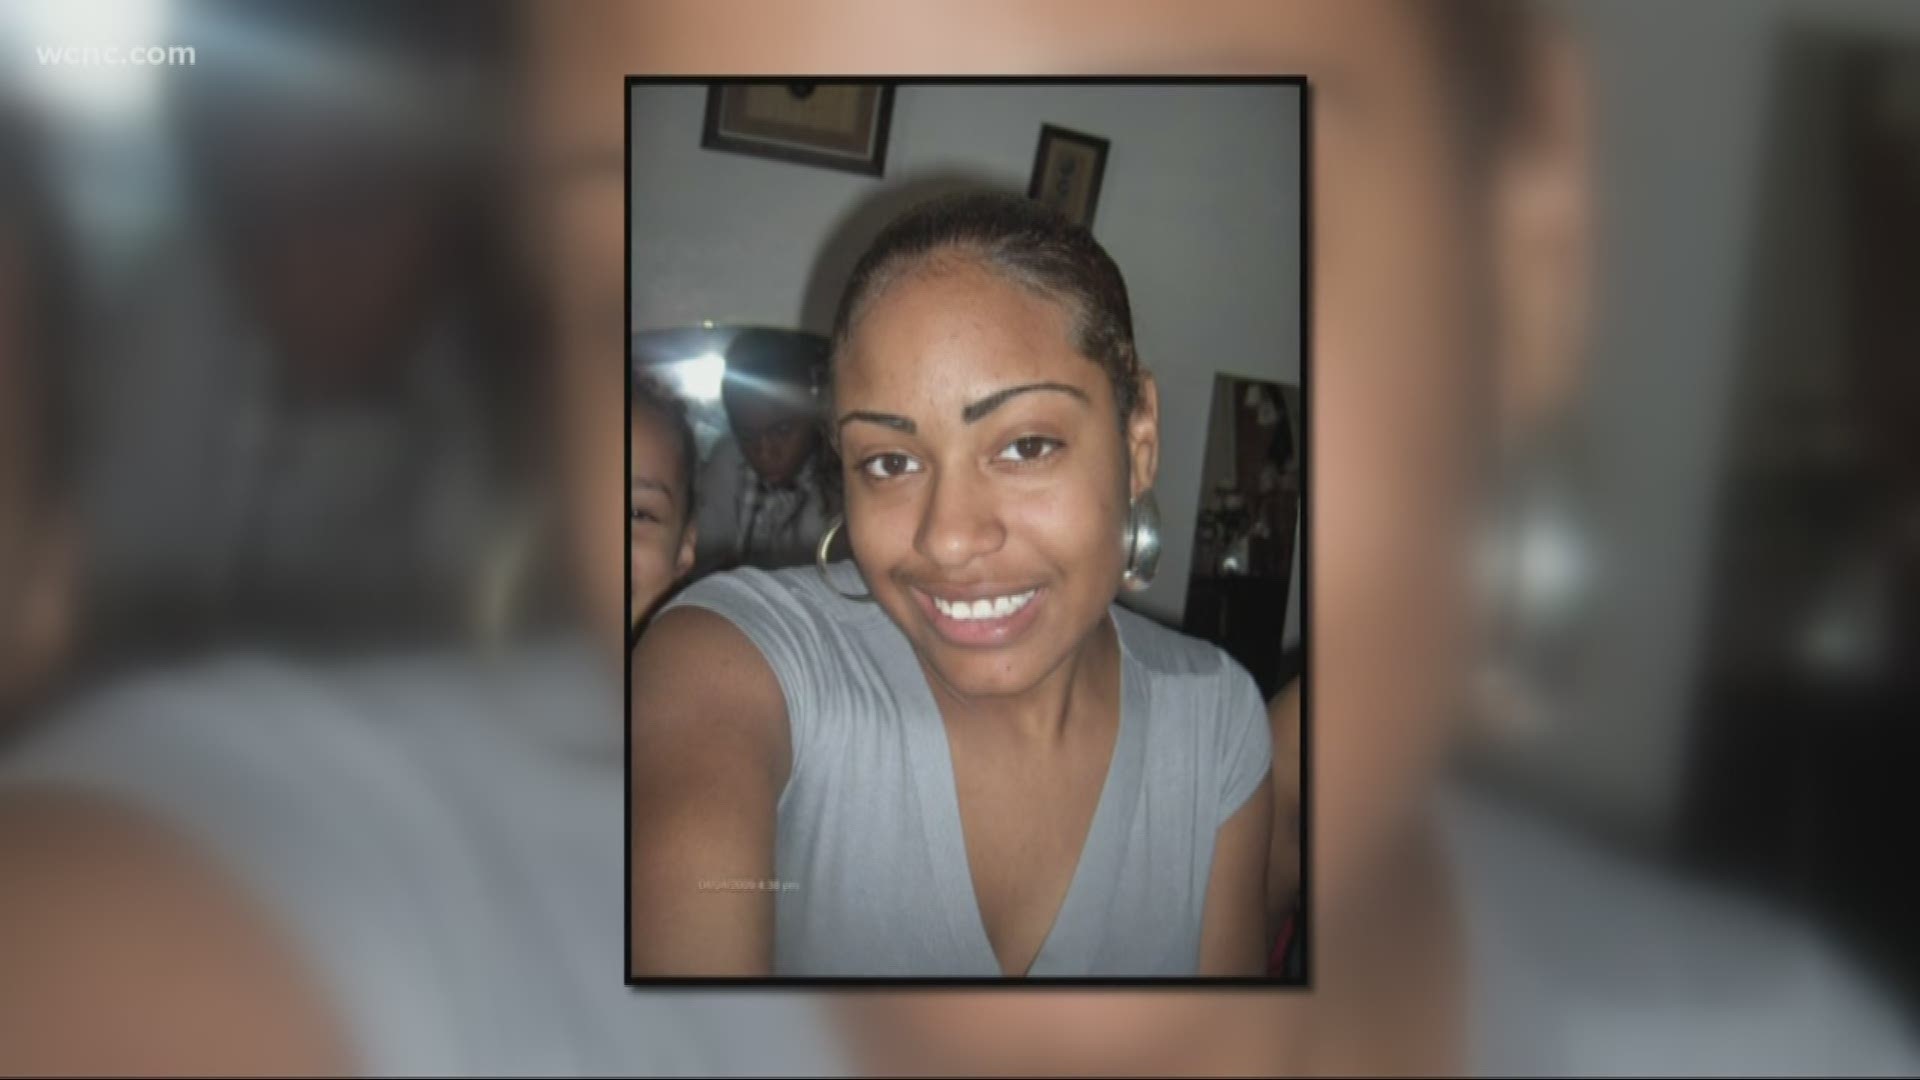 Police say 27-year-old Tulvel McDouga was shot and killed on Great Laurel Road Monday. Her family is struggling to deal with the tragedy that left a loved one dead.